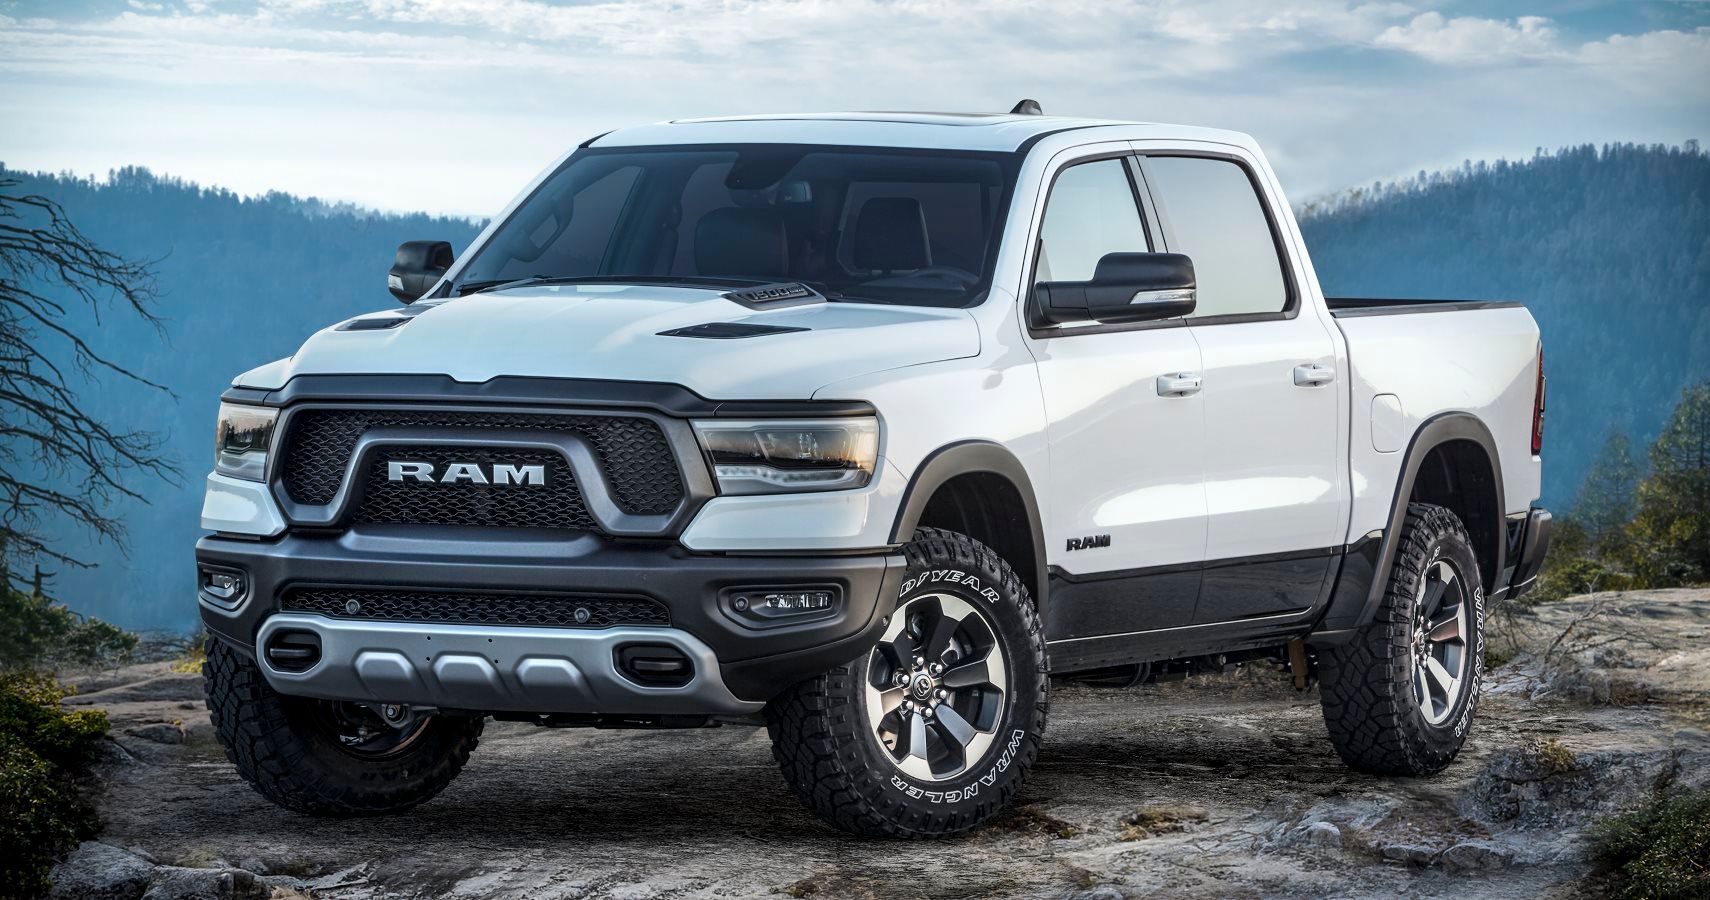 20192020 Ram 1500s Recalled Due To Faulty Airbags HotCars